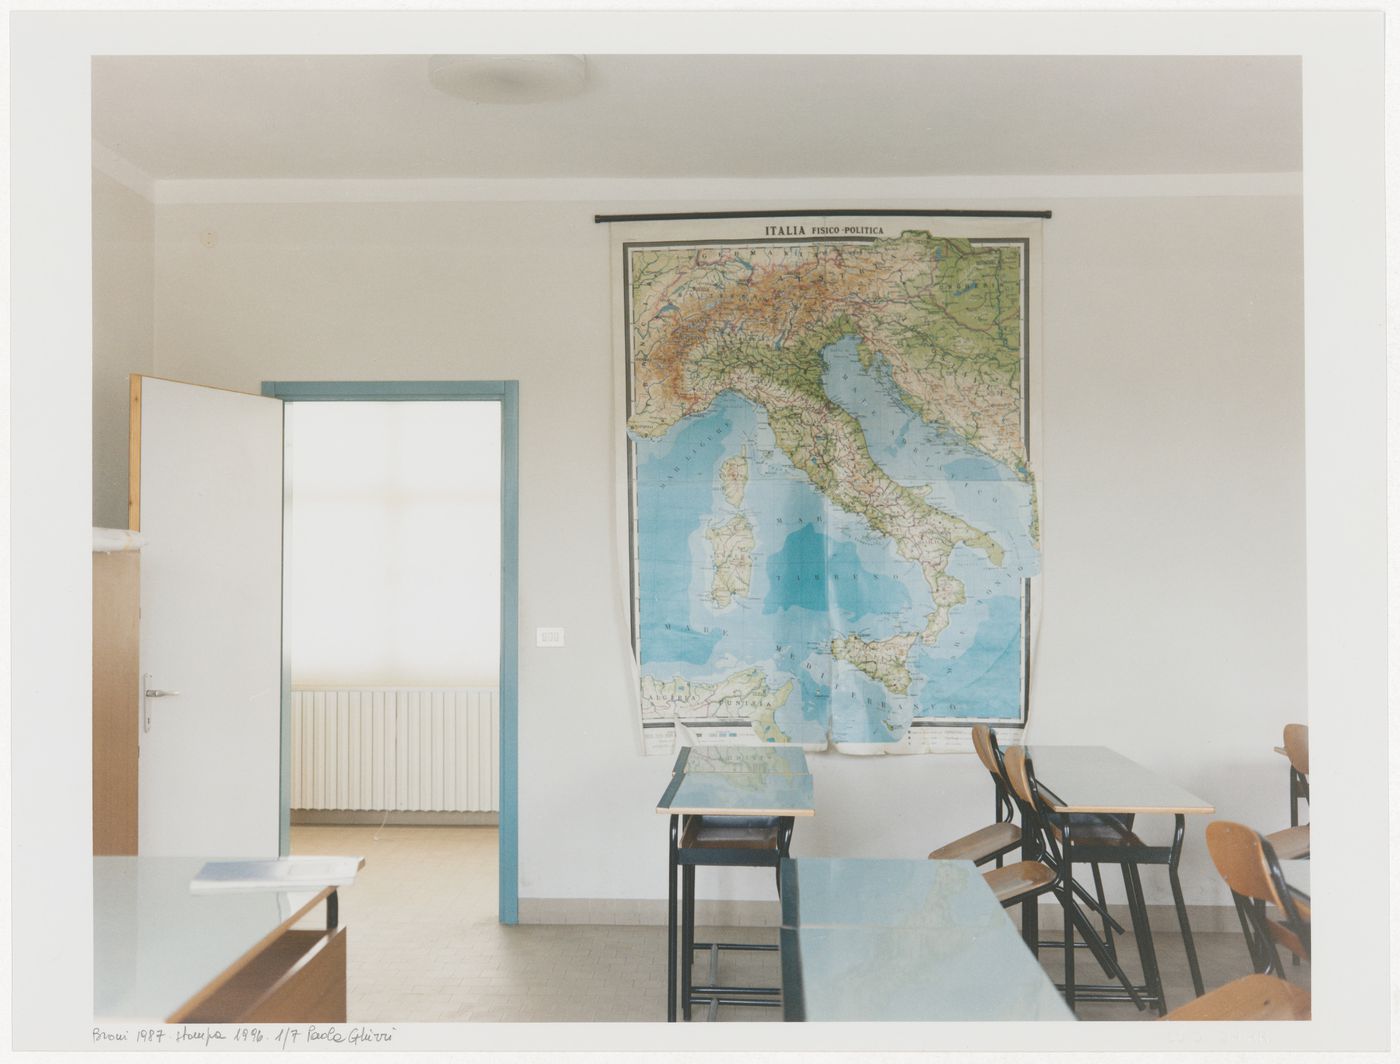 Interior view of a secondary school, Broni, Italy